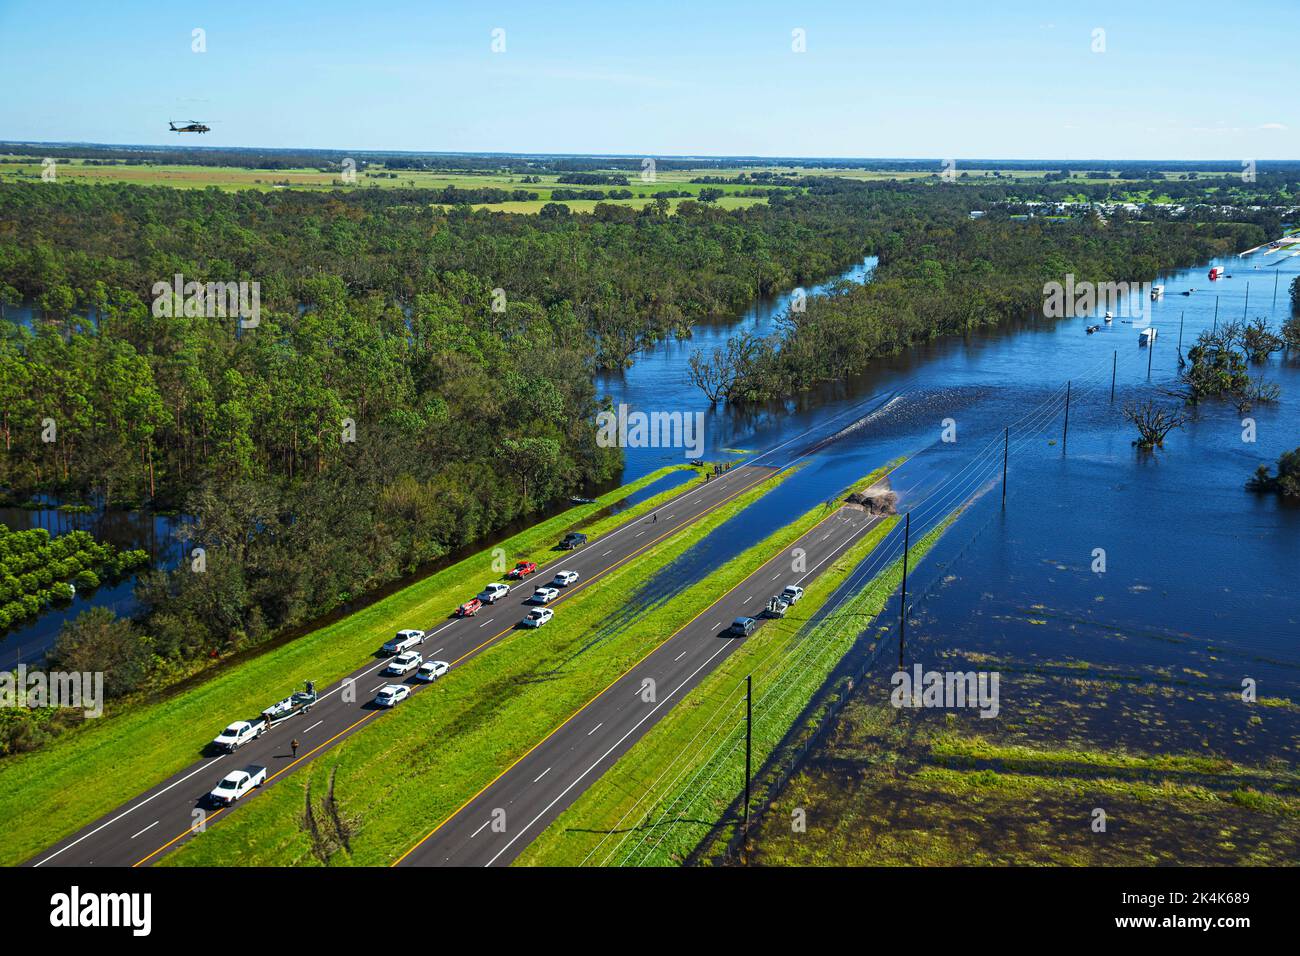 NEAR FORT MYERS, FLORIDA, USA - 30 September 2022 - Aerial view of the aftermath along Florida's coast after Hurricane Ian made landfall, here a flood Stock Photo